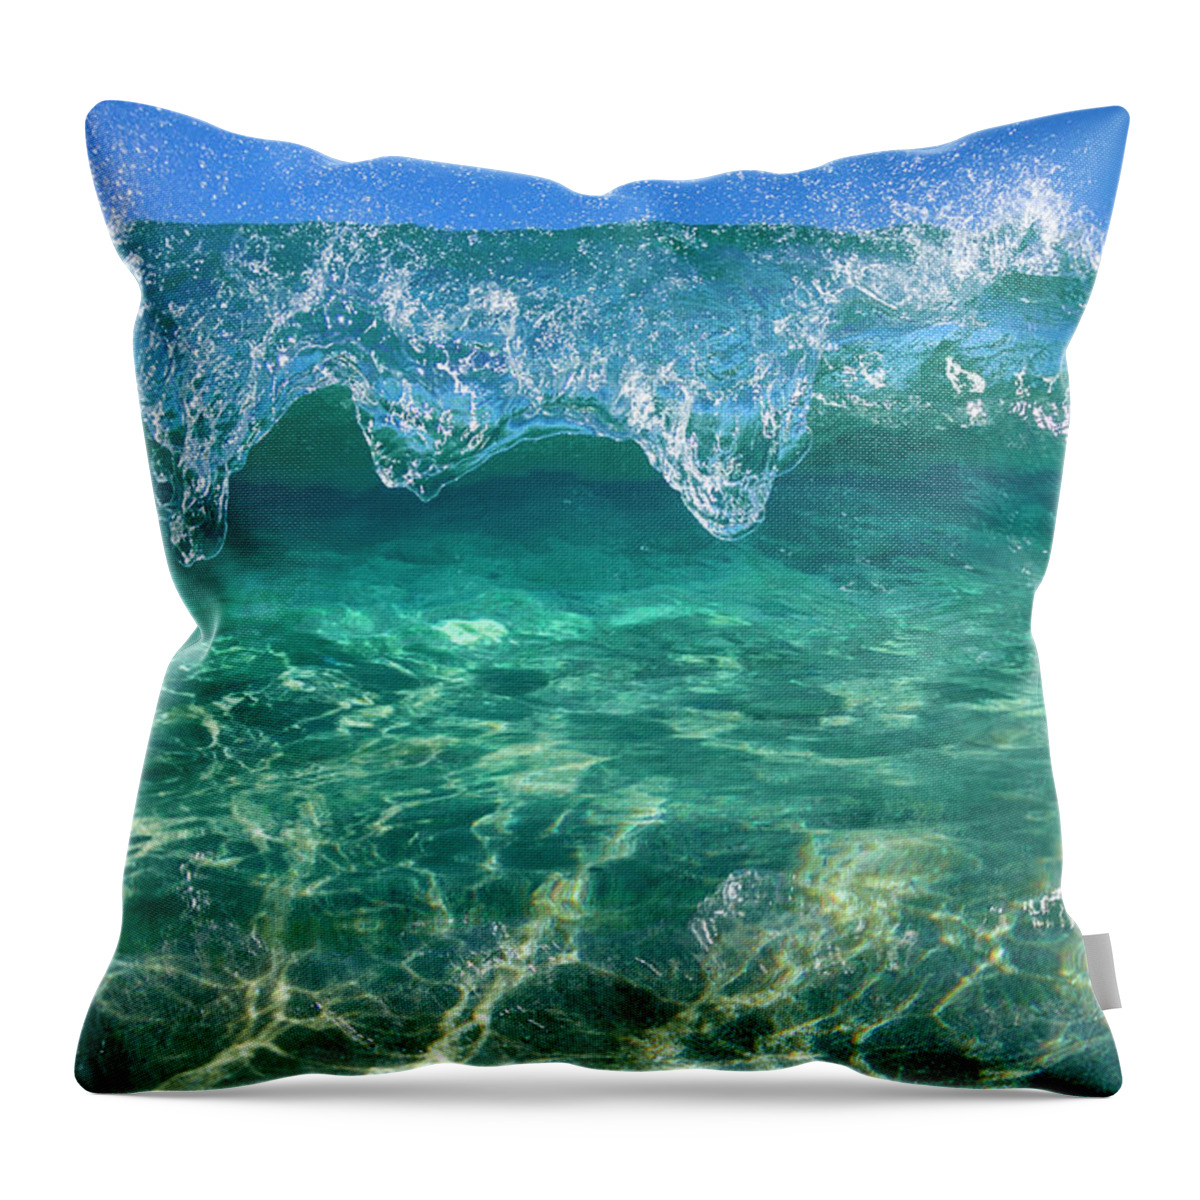 Crystal Clam Throw Pillow featuring the photograph Crystal Clam by Sean Davey